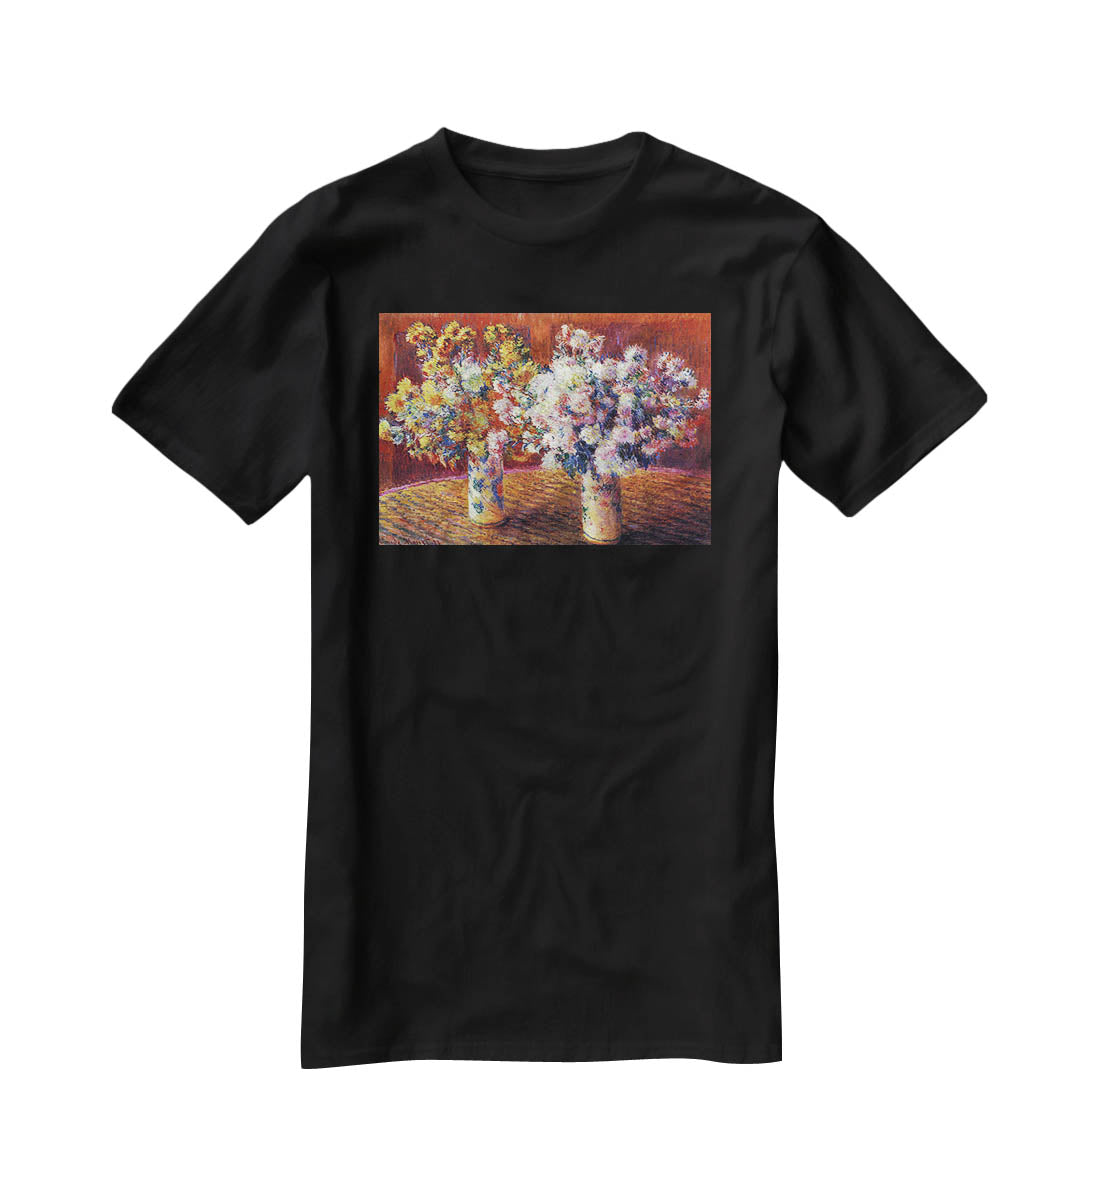 Two vases with Chrysanthemums by Monet T-Shirt - Canvas Art Rocks - 1